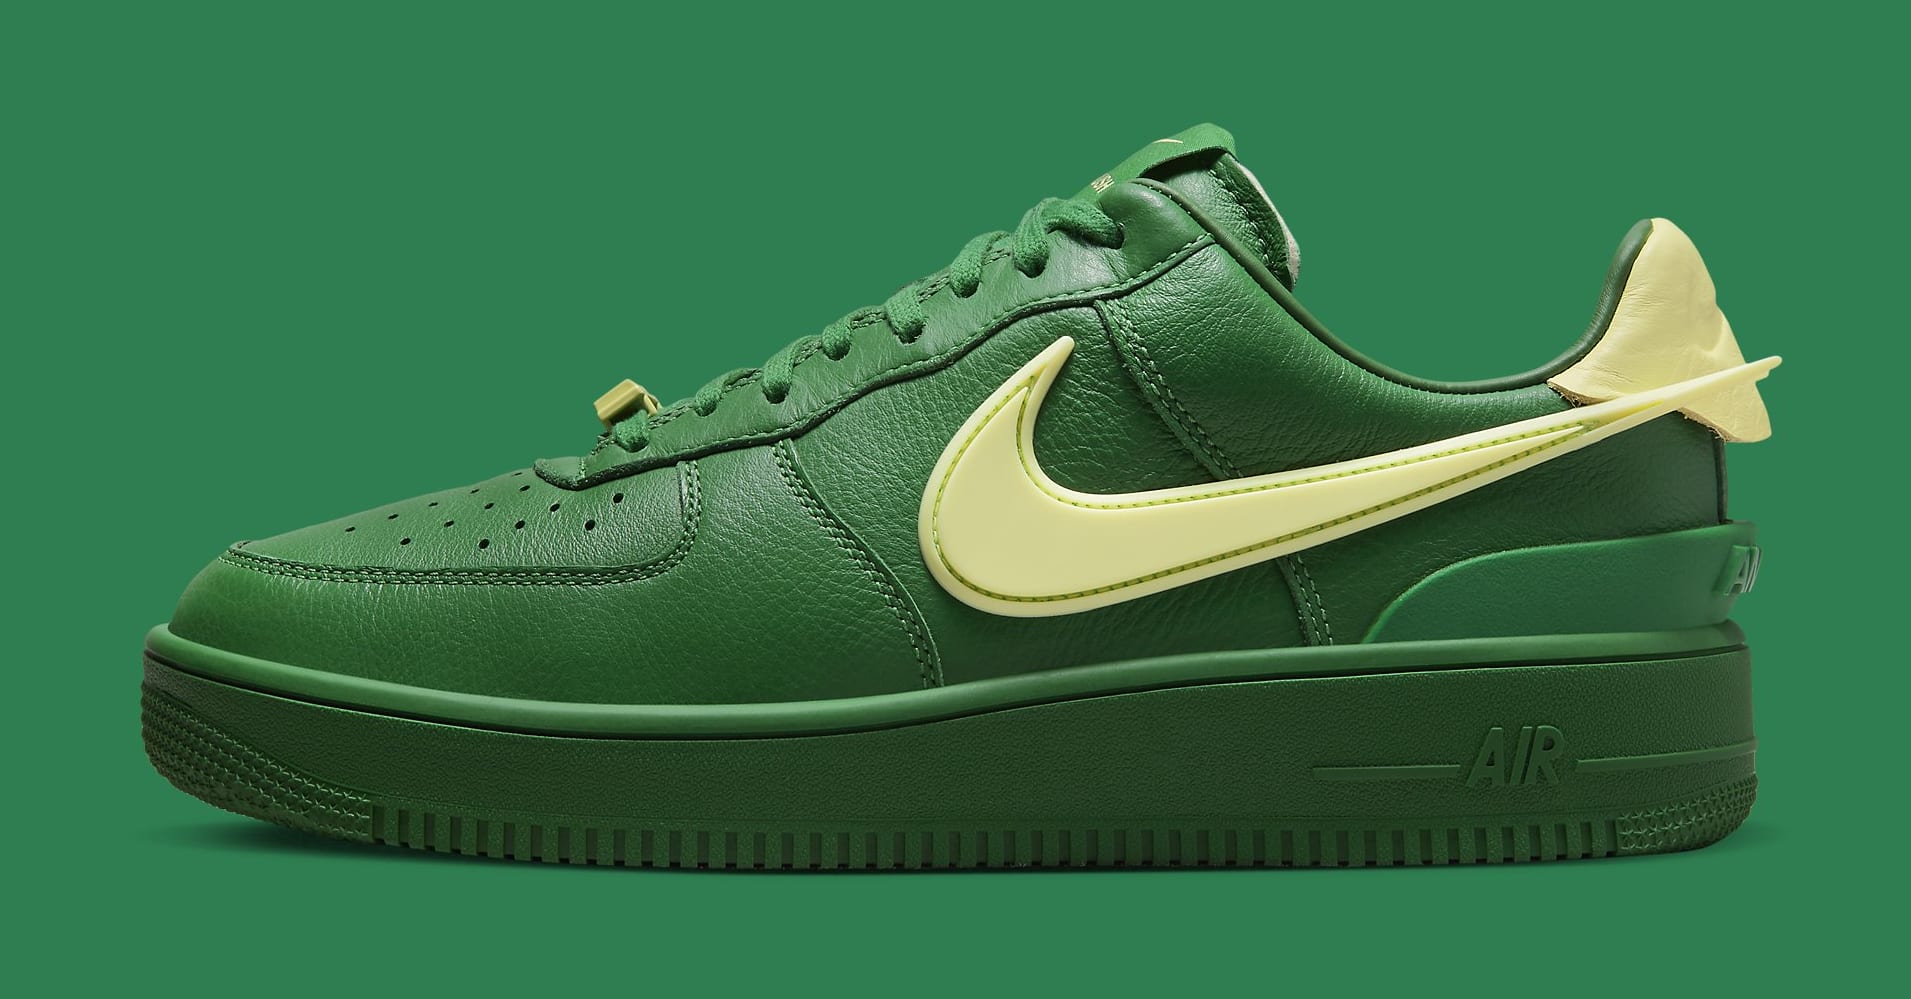 Ambush x Nike Air Force 1 Low Collaboration Release Date | Sole Collector